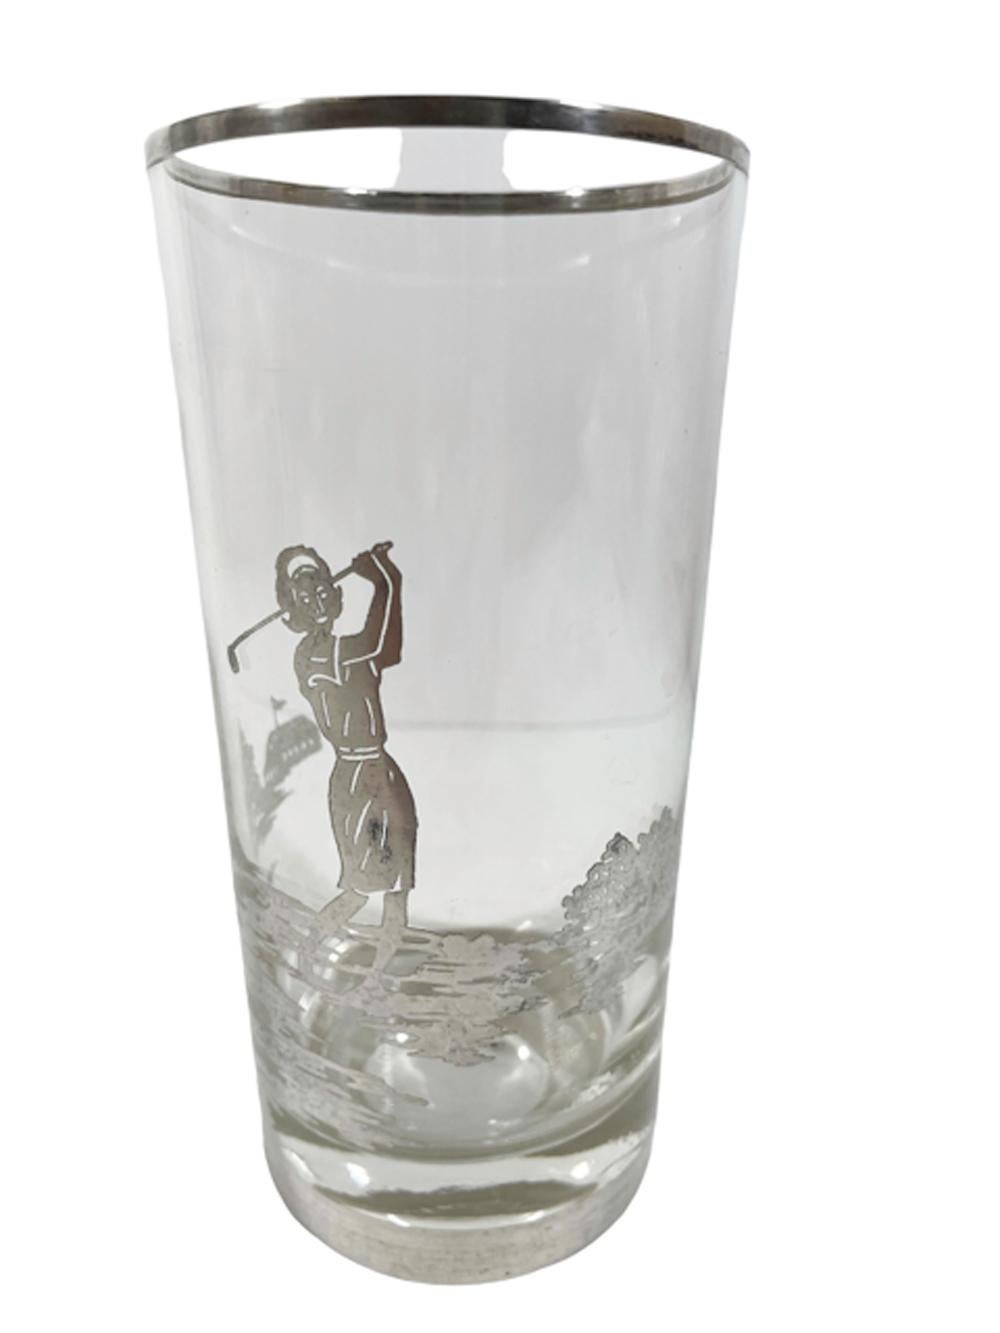 American Four Art Deco Silver Overlay Golf Theme Highball Glasses with a Woman Golfer For Sale